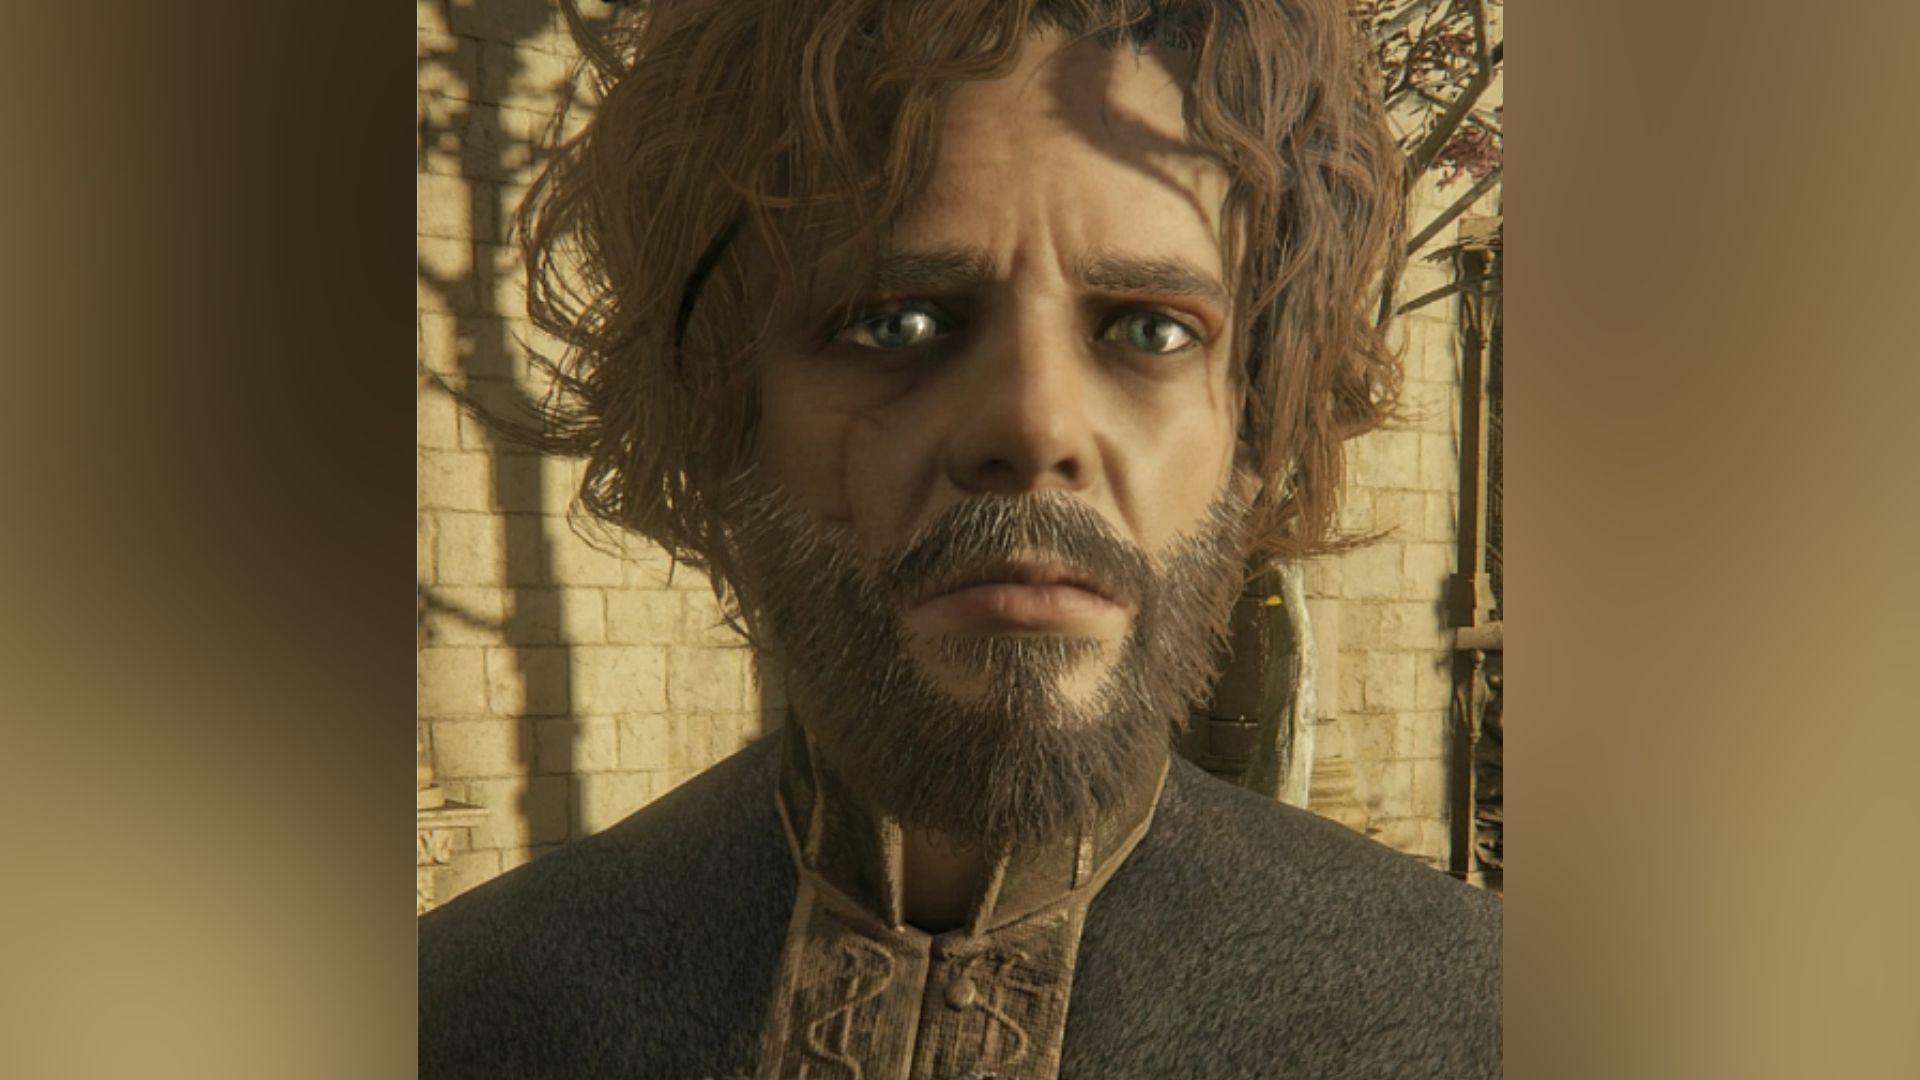 Elden Ring player recreates Game of Thrones characters in the RPG